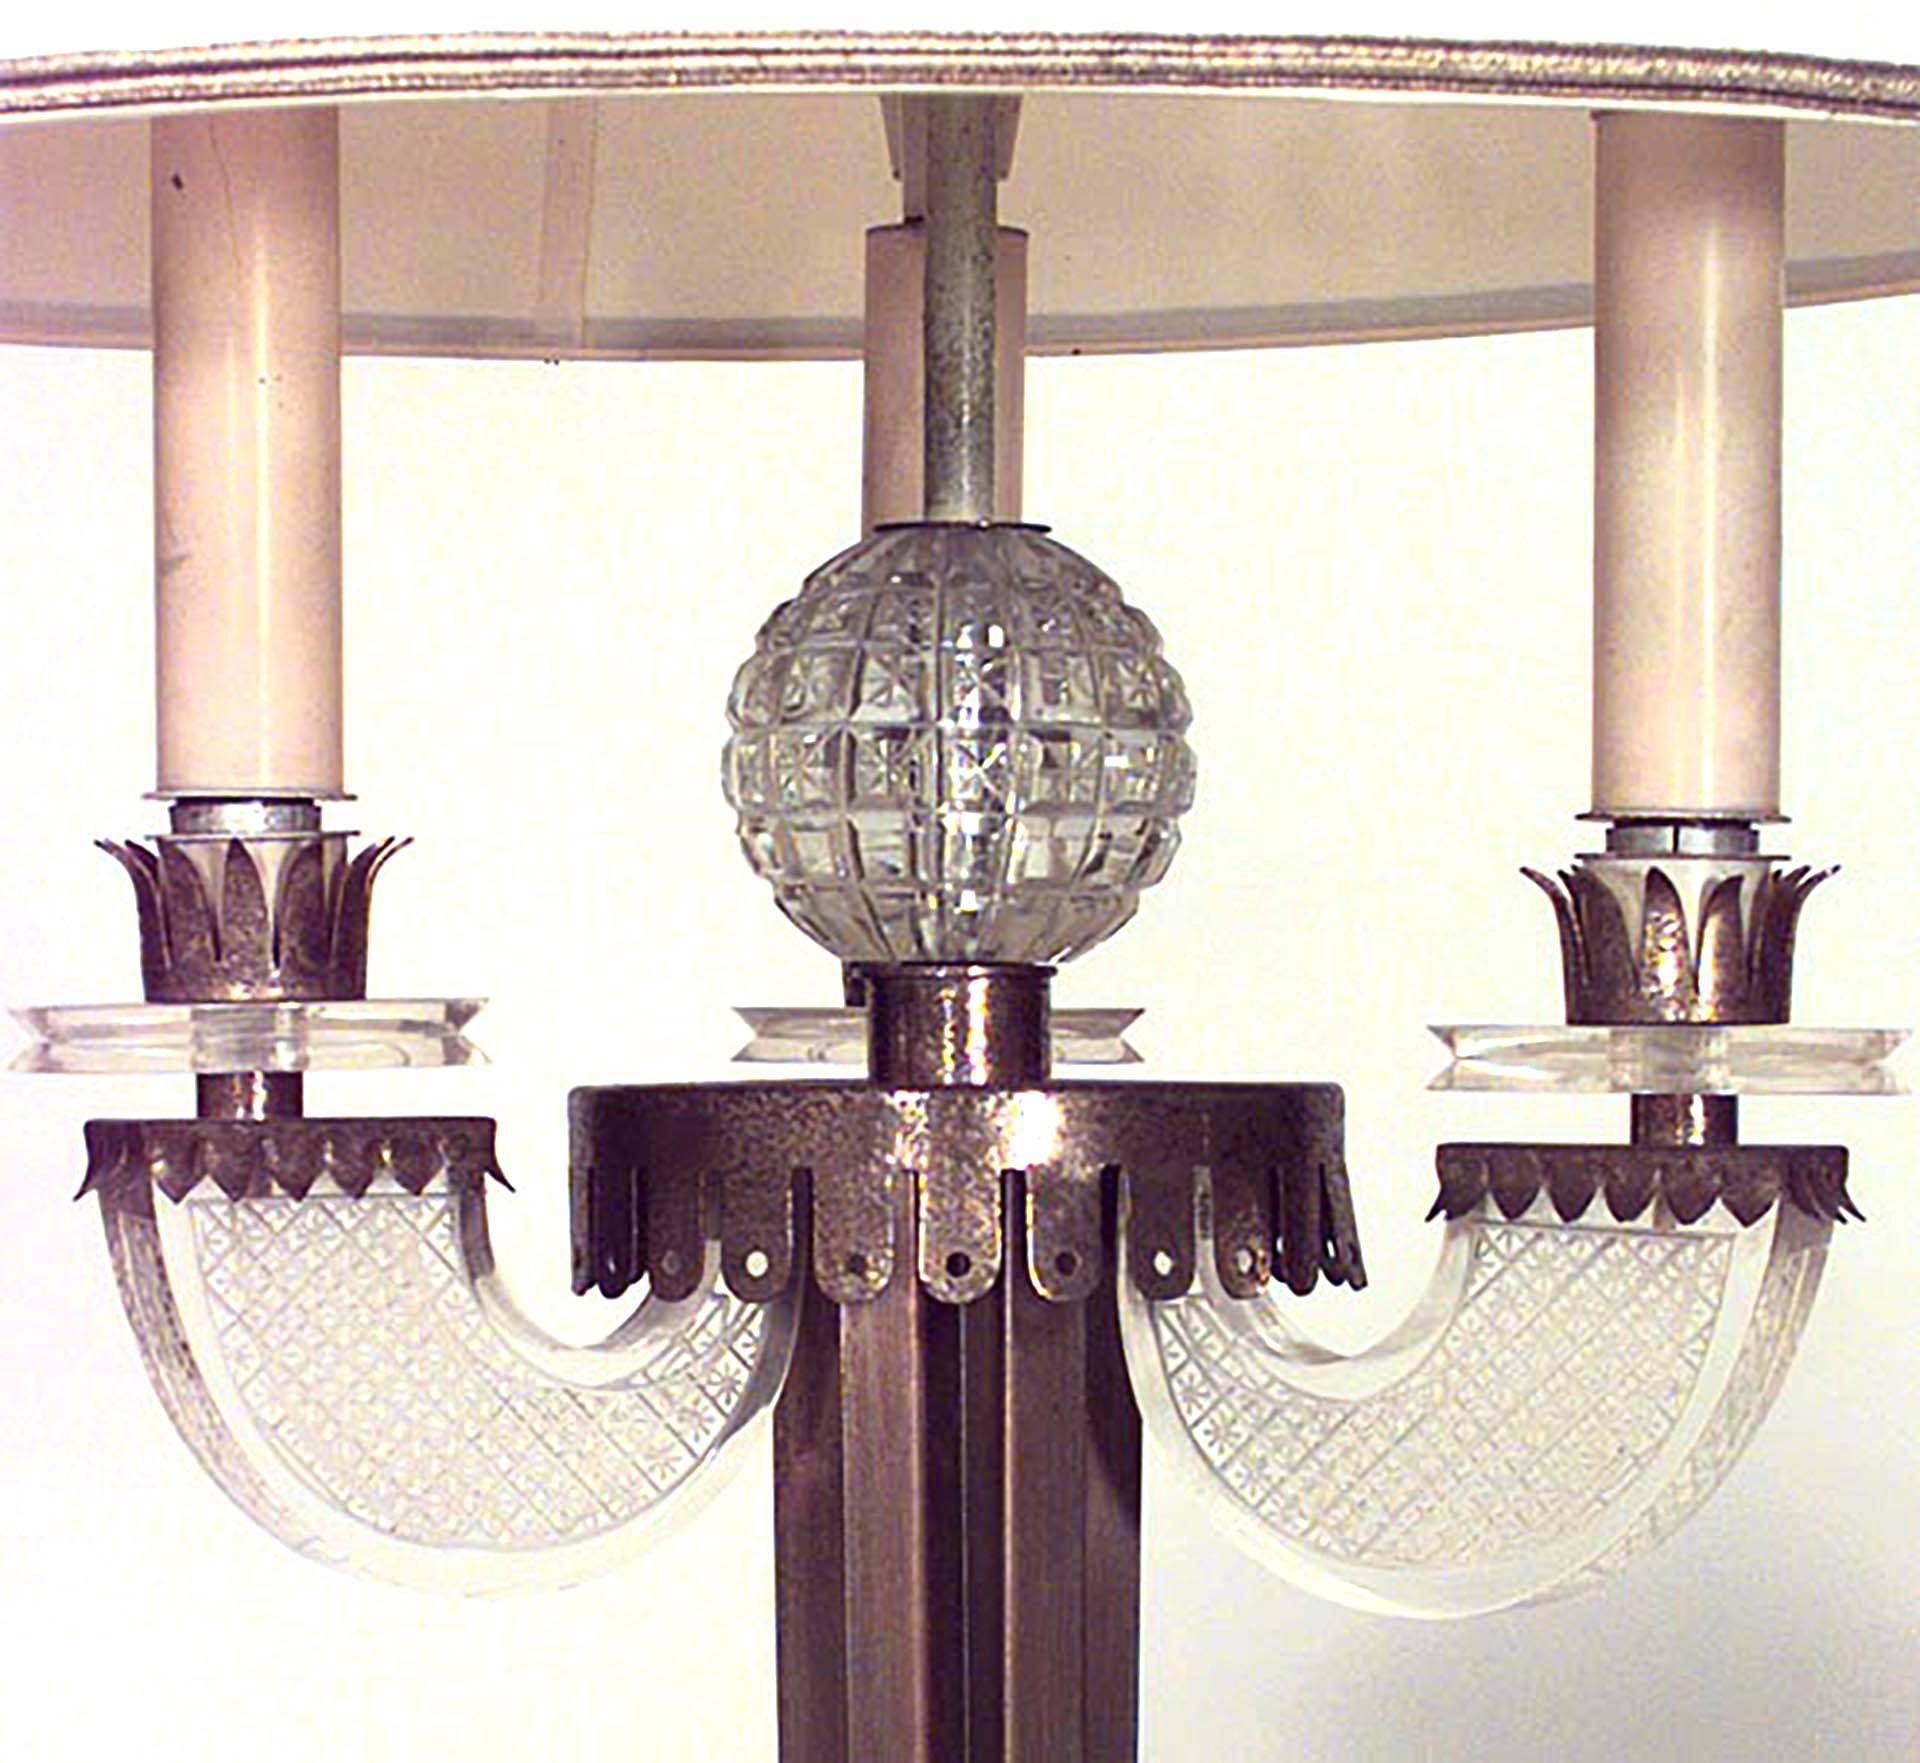 French 1940s fluted brass column floor lamp on 3 scroll legs with 3 etched lucite scroll & palm design arms (Raymond Lorence).
